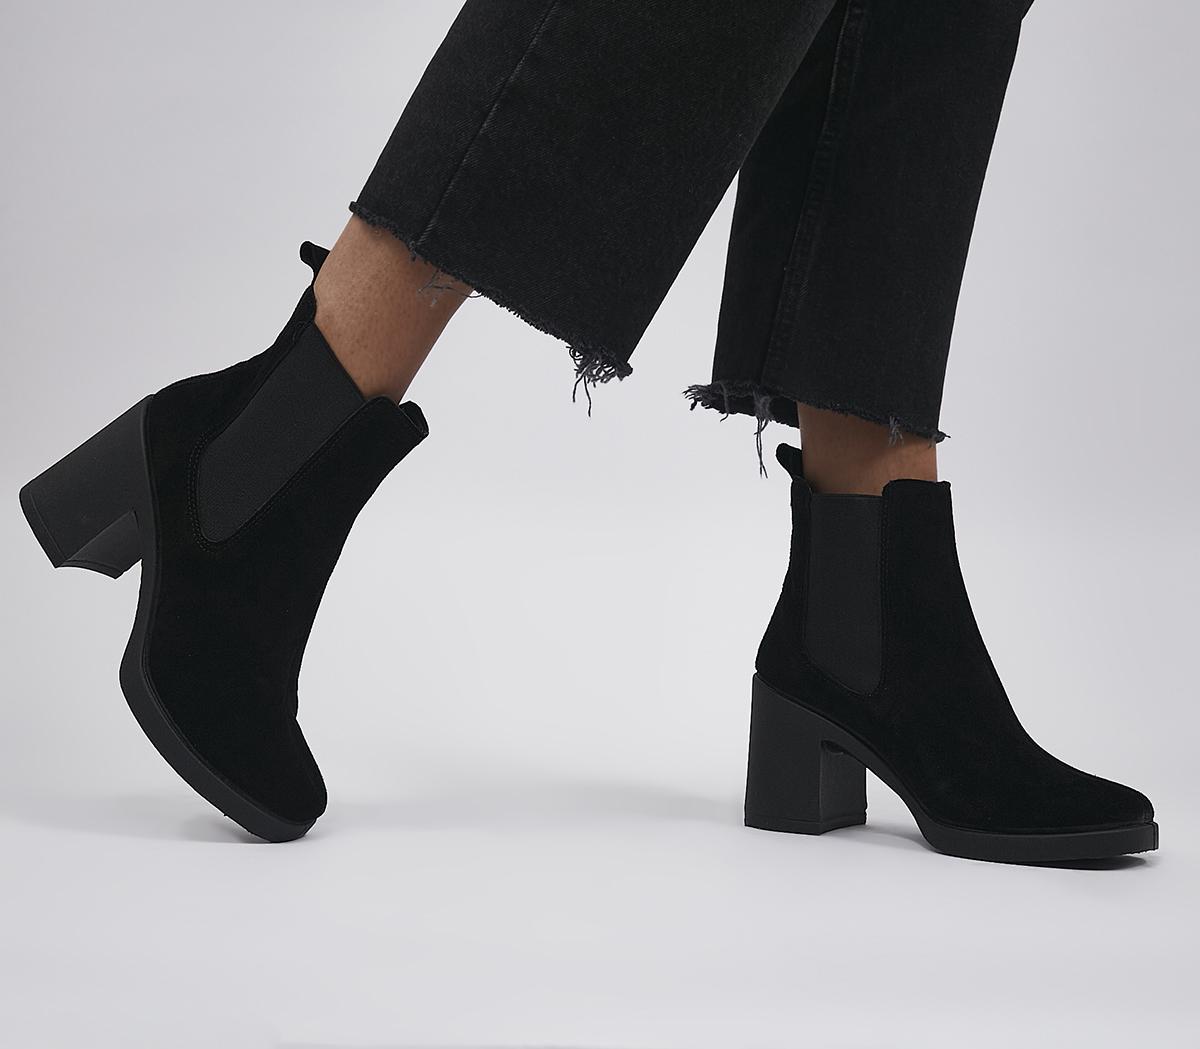 OFFICE Absolutely Heeled Unit Chelsea Black Suede - Women's Ankle Boots